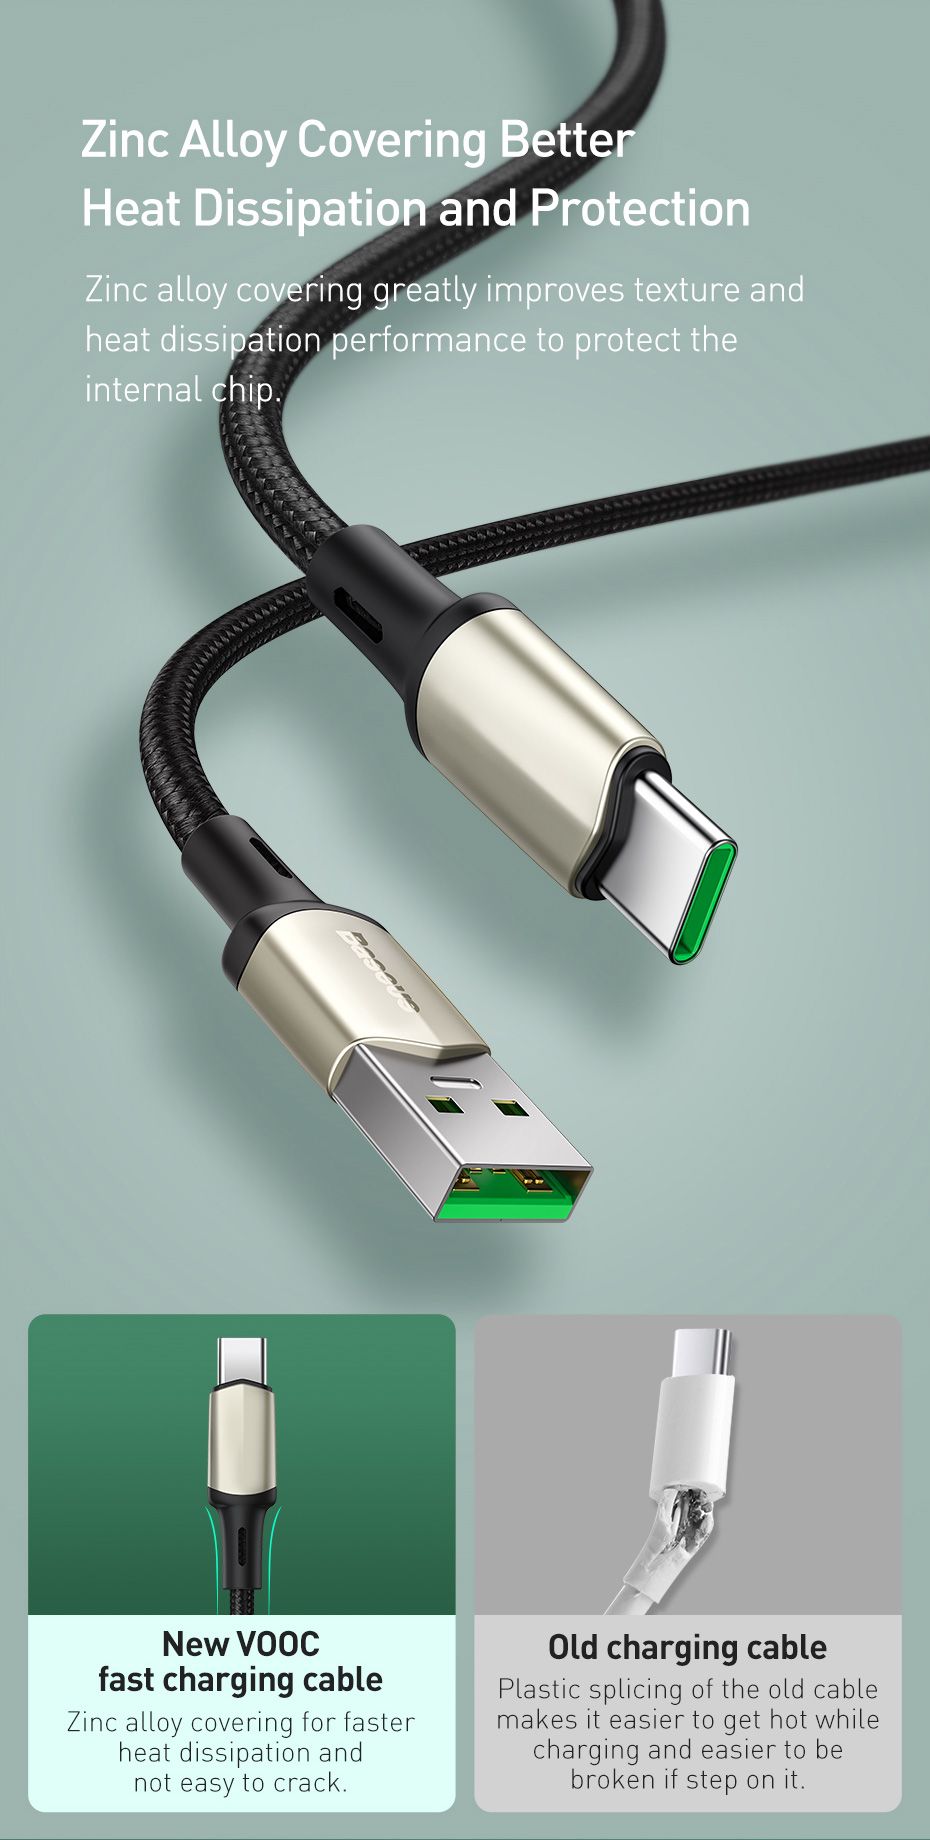 Baseus-Cafule-30W-5A-Warp-OPPO-VOOC-Certified-Flash-Charge-USB-Type-C-Cable-QC30-SCP-AFC-FCP-Fast-Ch-1706413